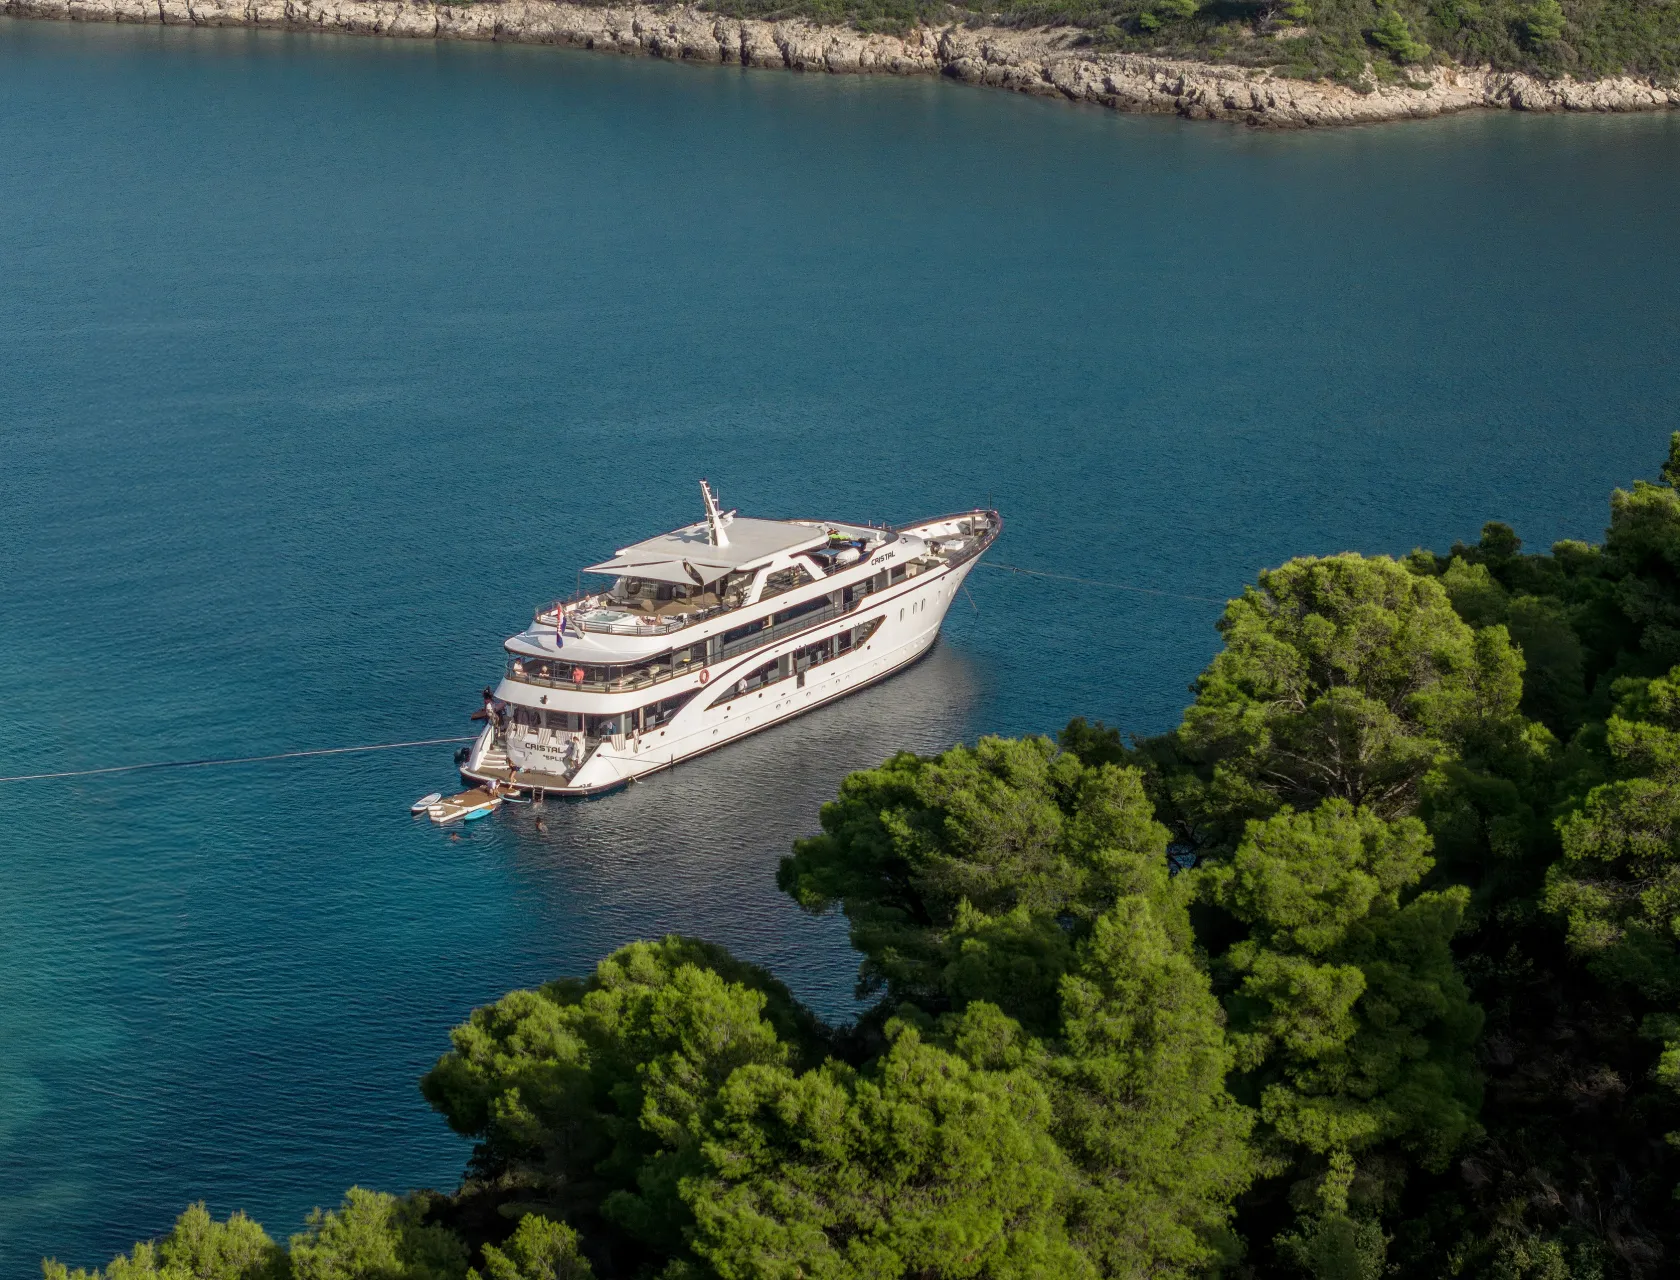 DS Yacht Cristal - the perfect yacht for a memorable vacation